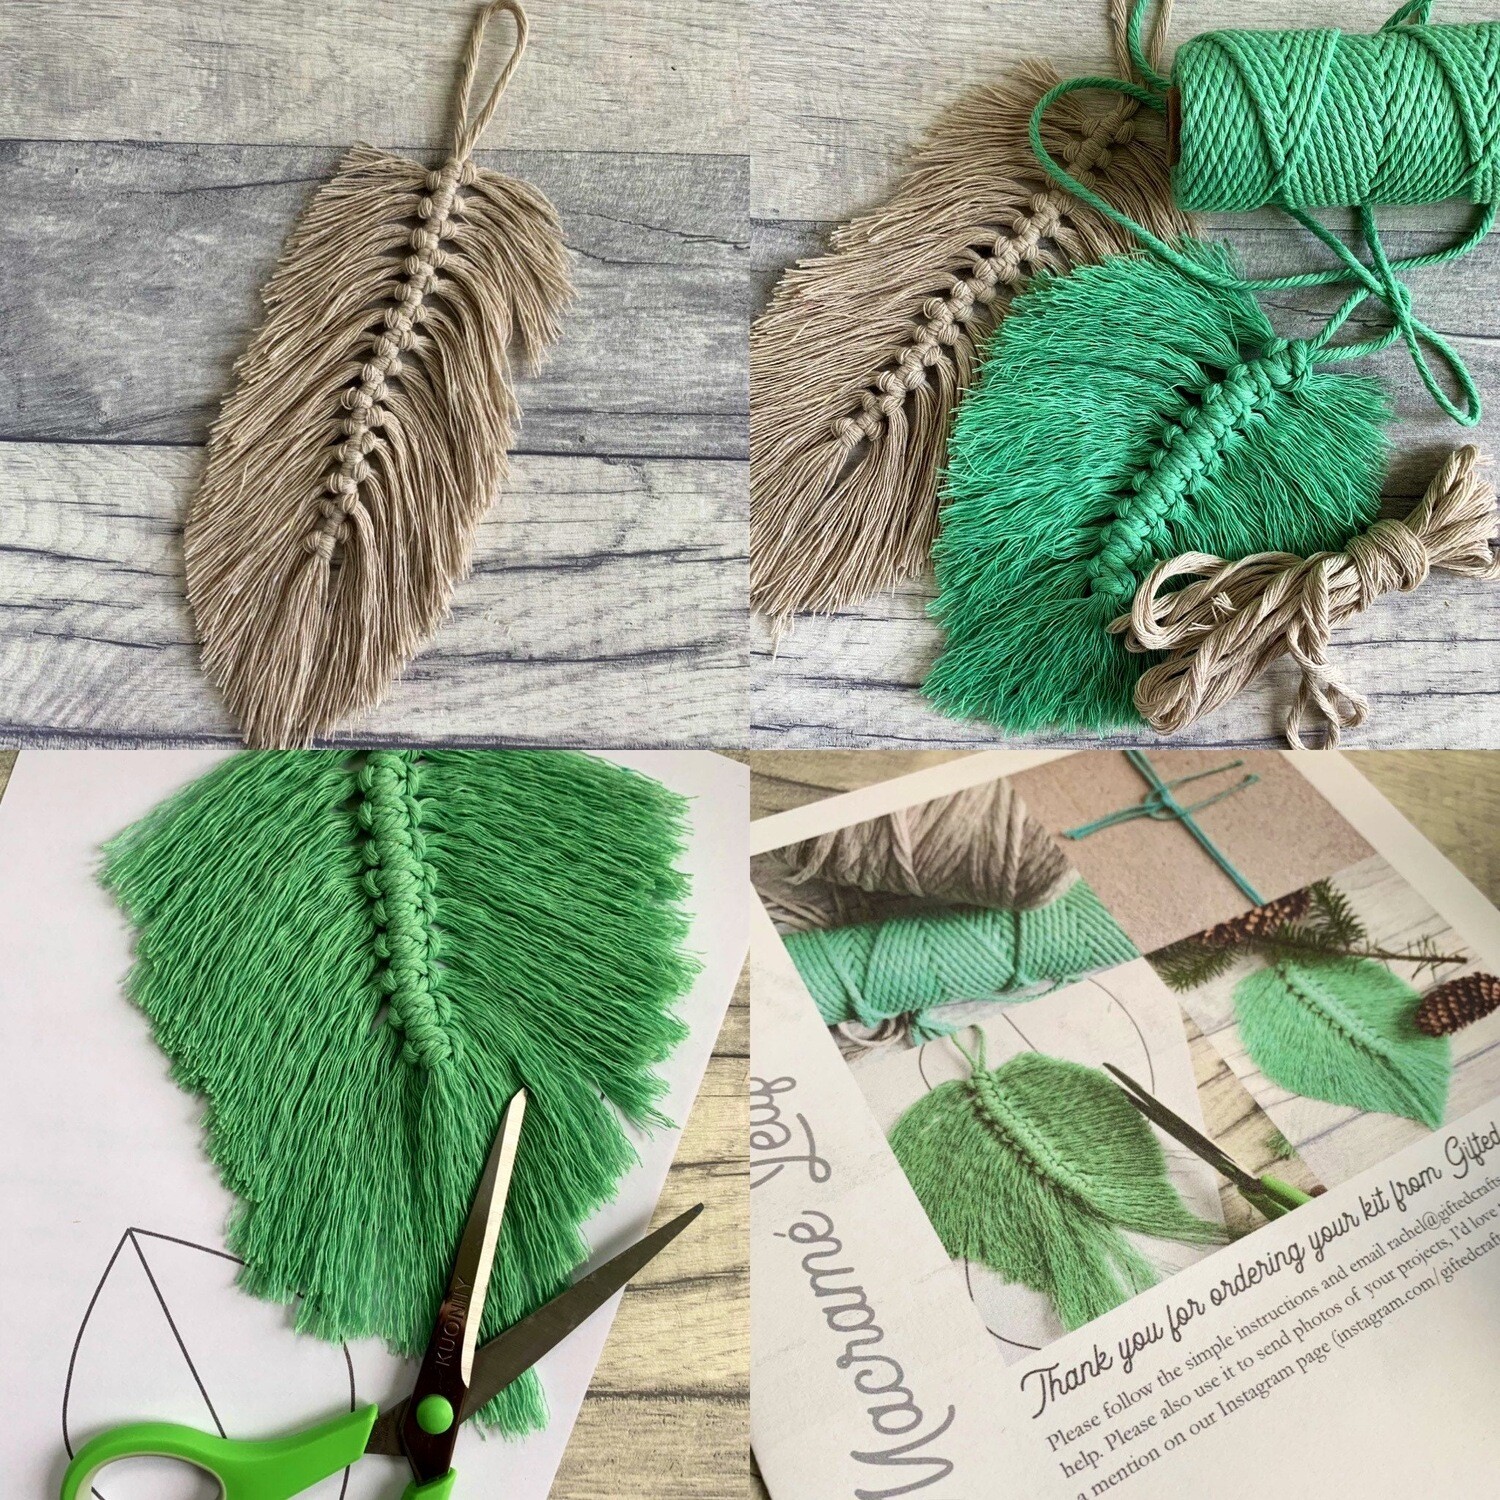 Indulgent Macramé Kit Subscription with Free Online Support